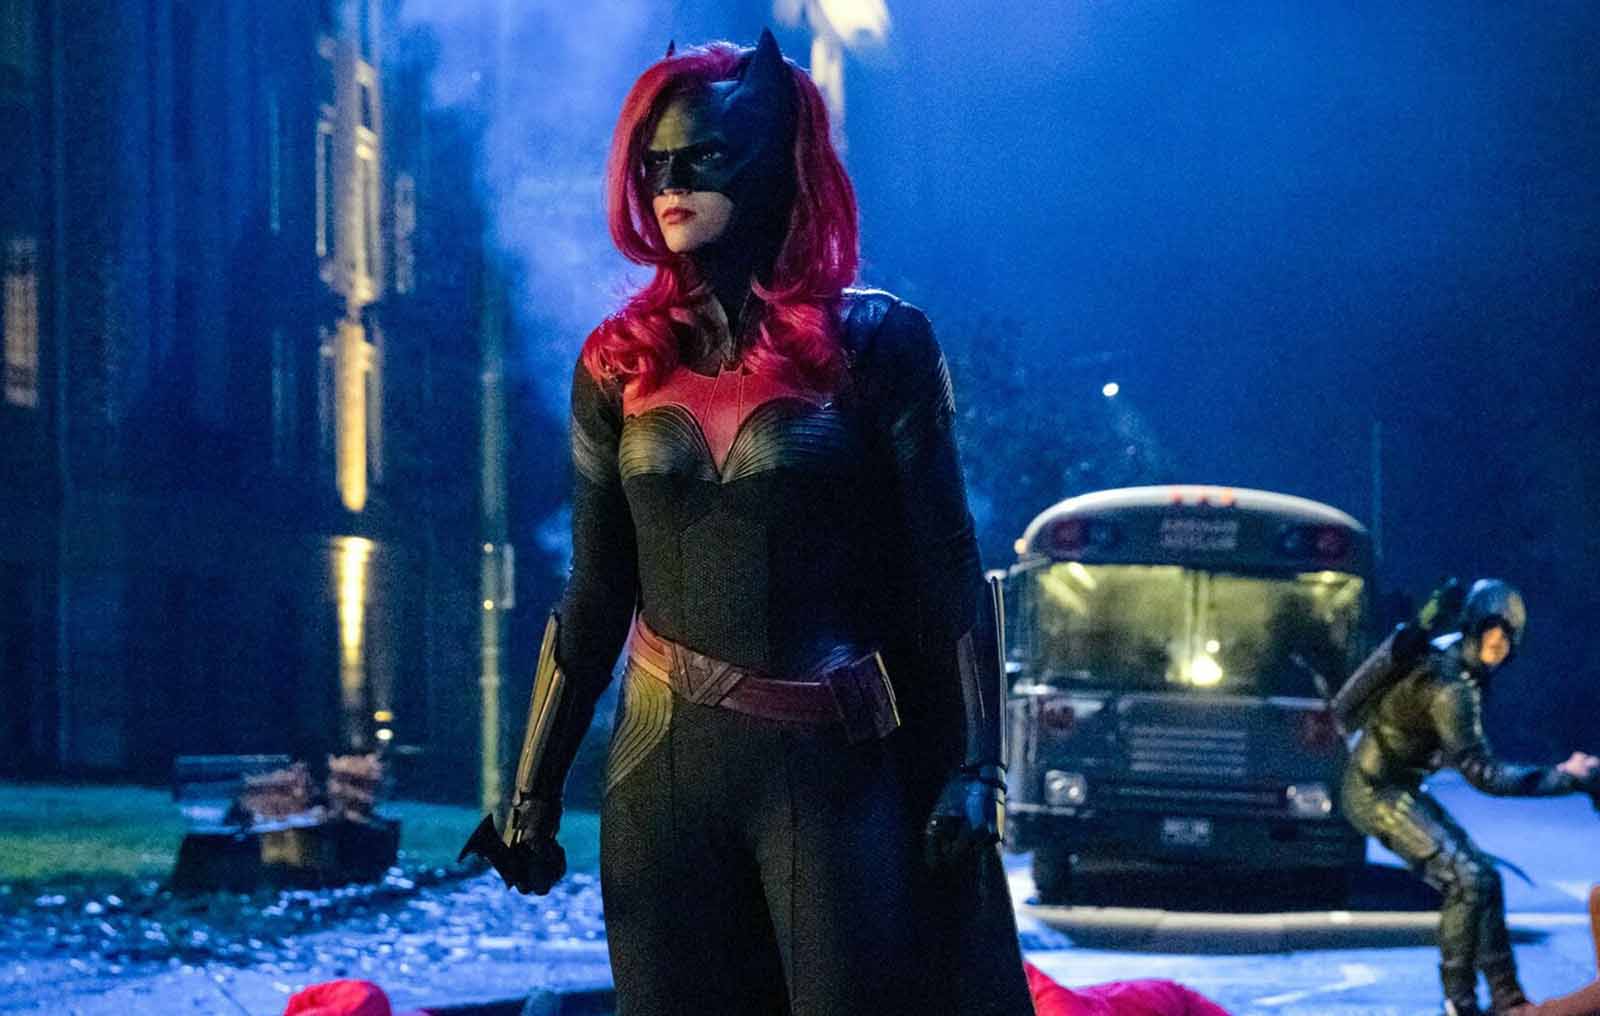 Now that Ruby Rose is gone from The CW's 'Batwoman', we're waiting to see who steps into the role next. But the CW is going in a different direction.